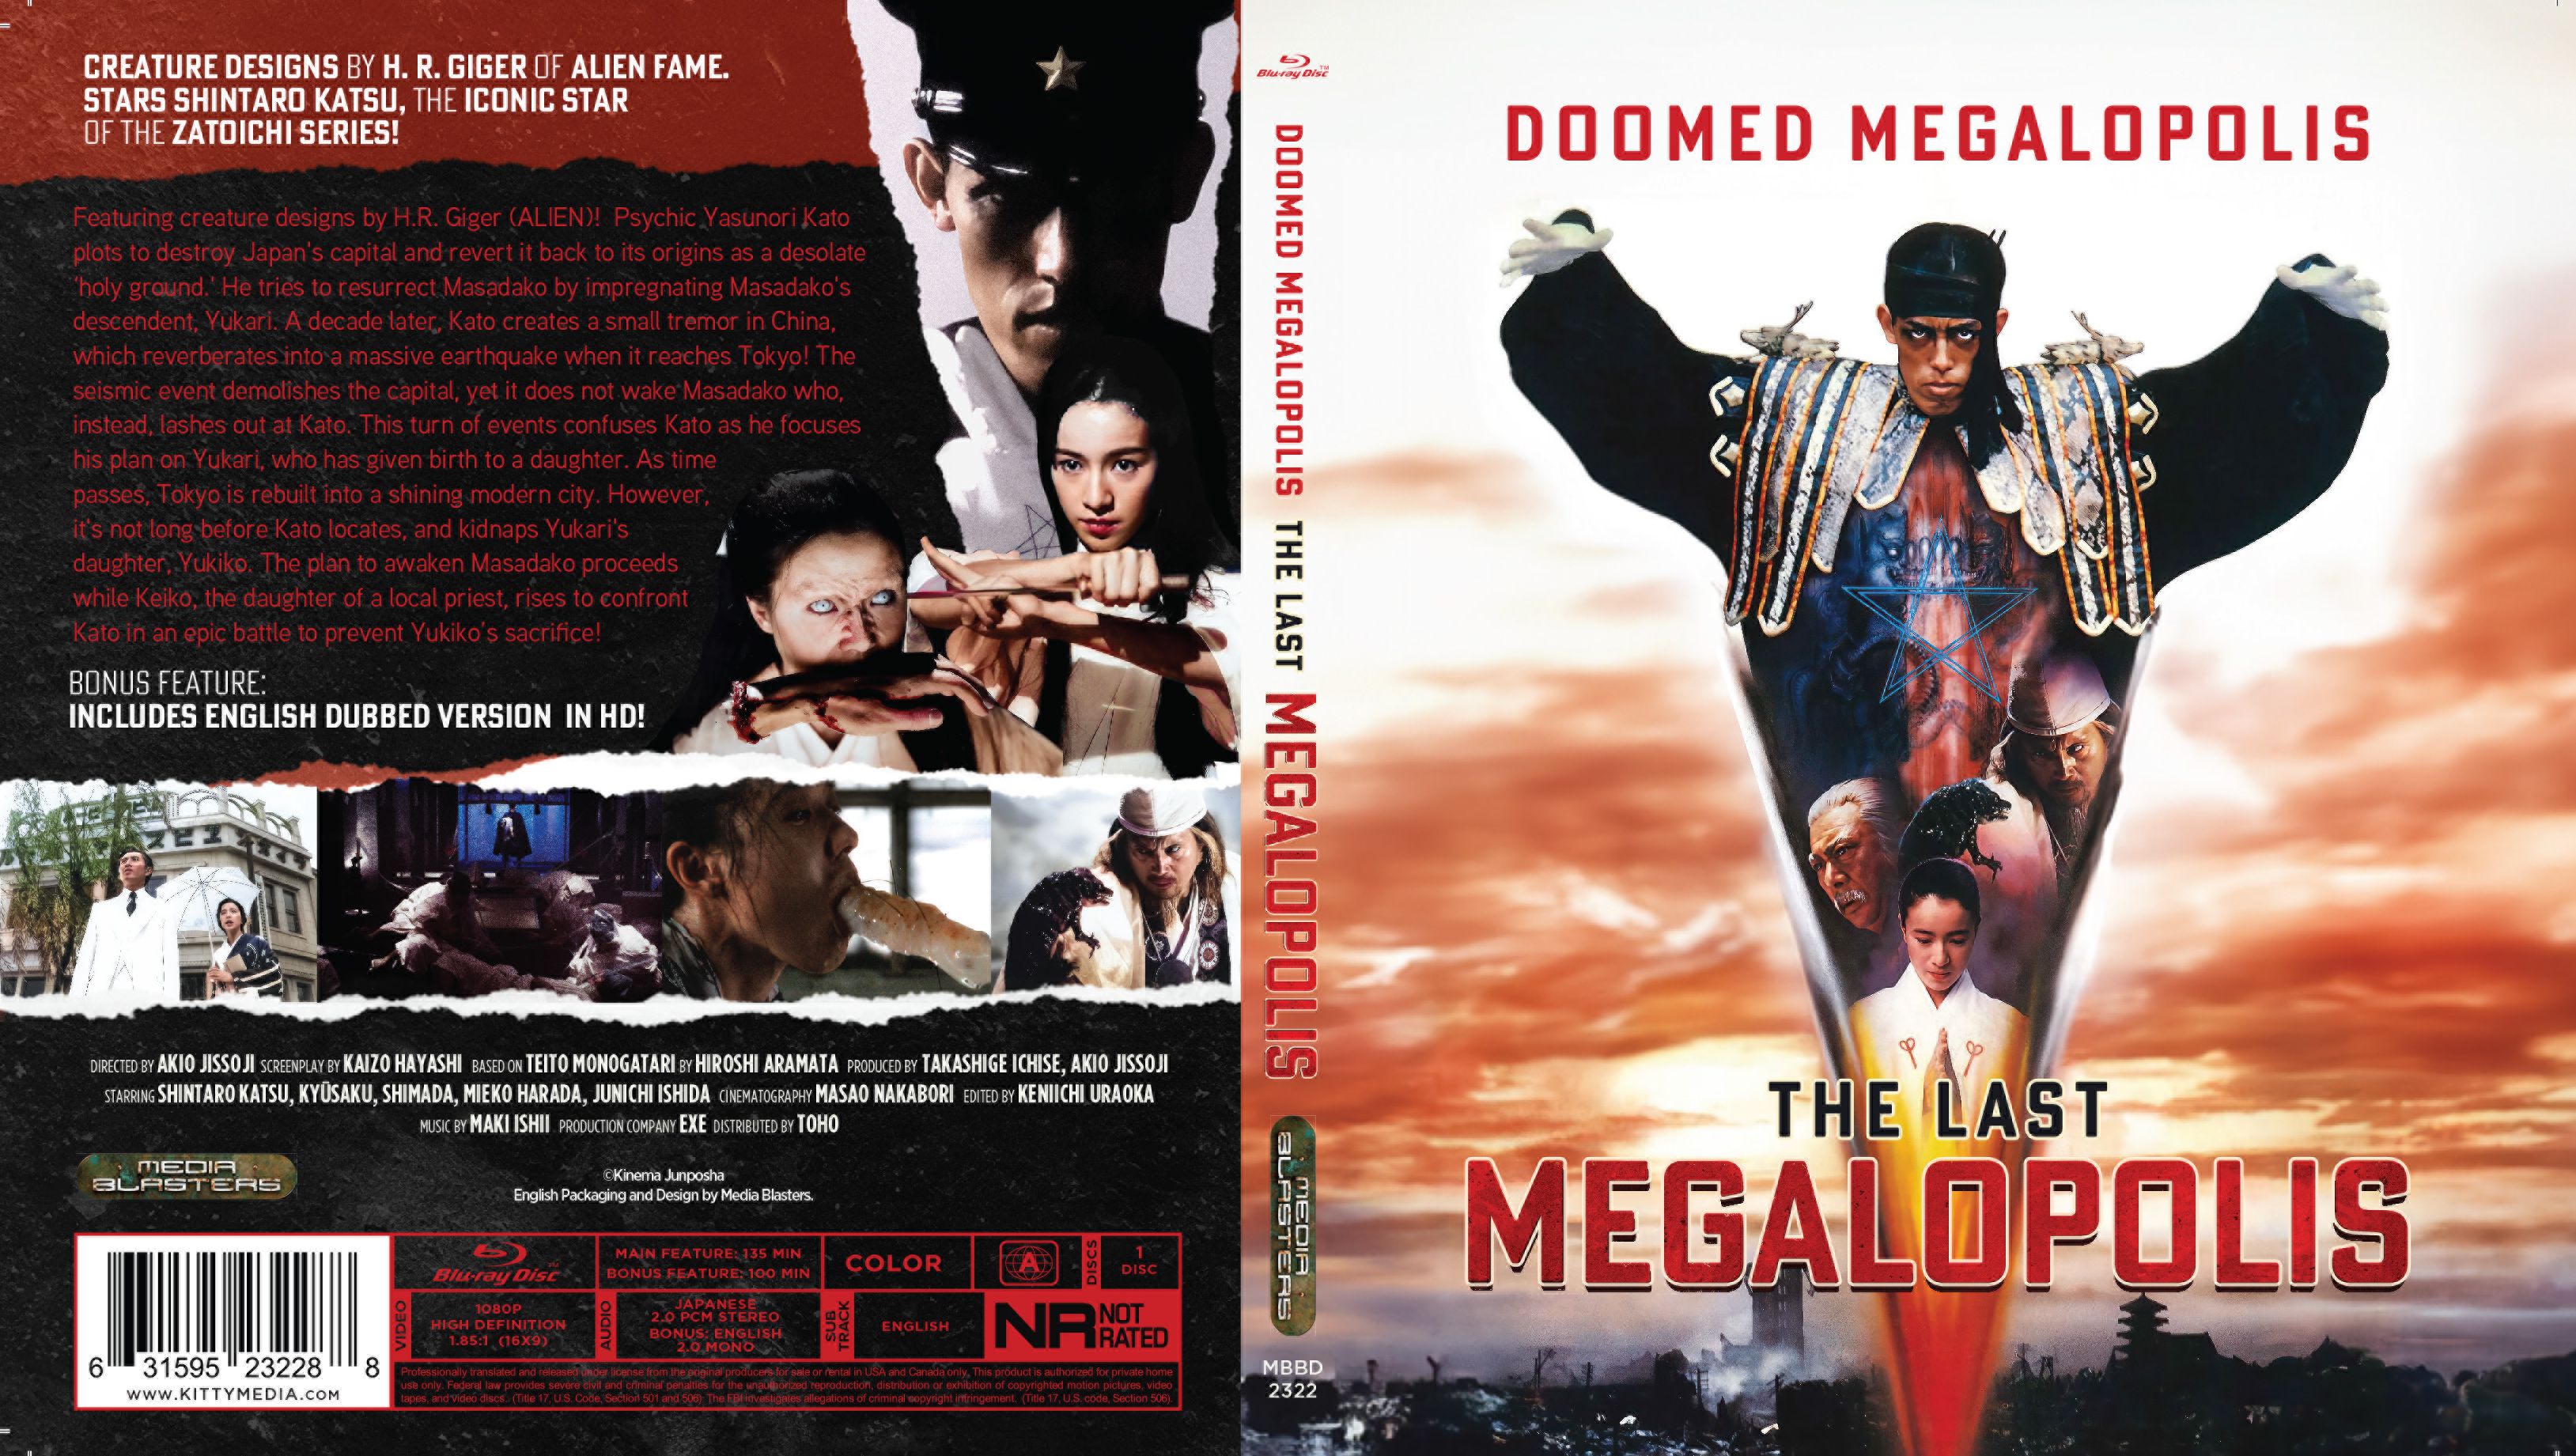 DOOMED MEGALOPOLIS: THE LAST MEGALOPOLIS On Blu-ray From Media